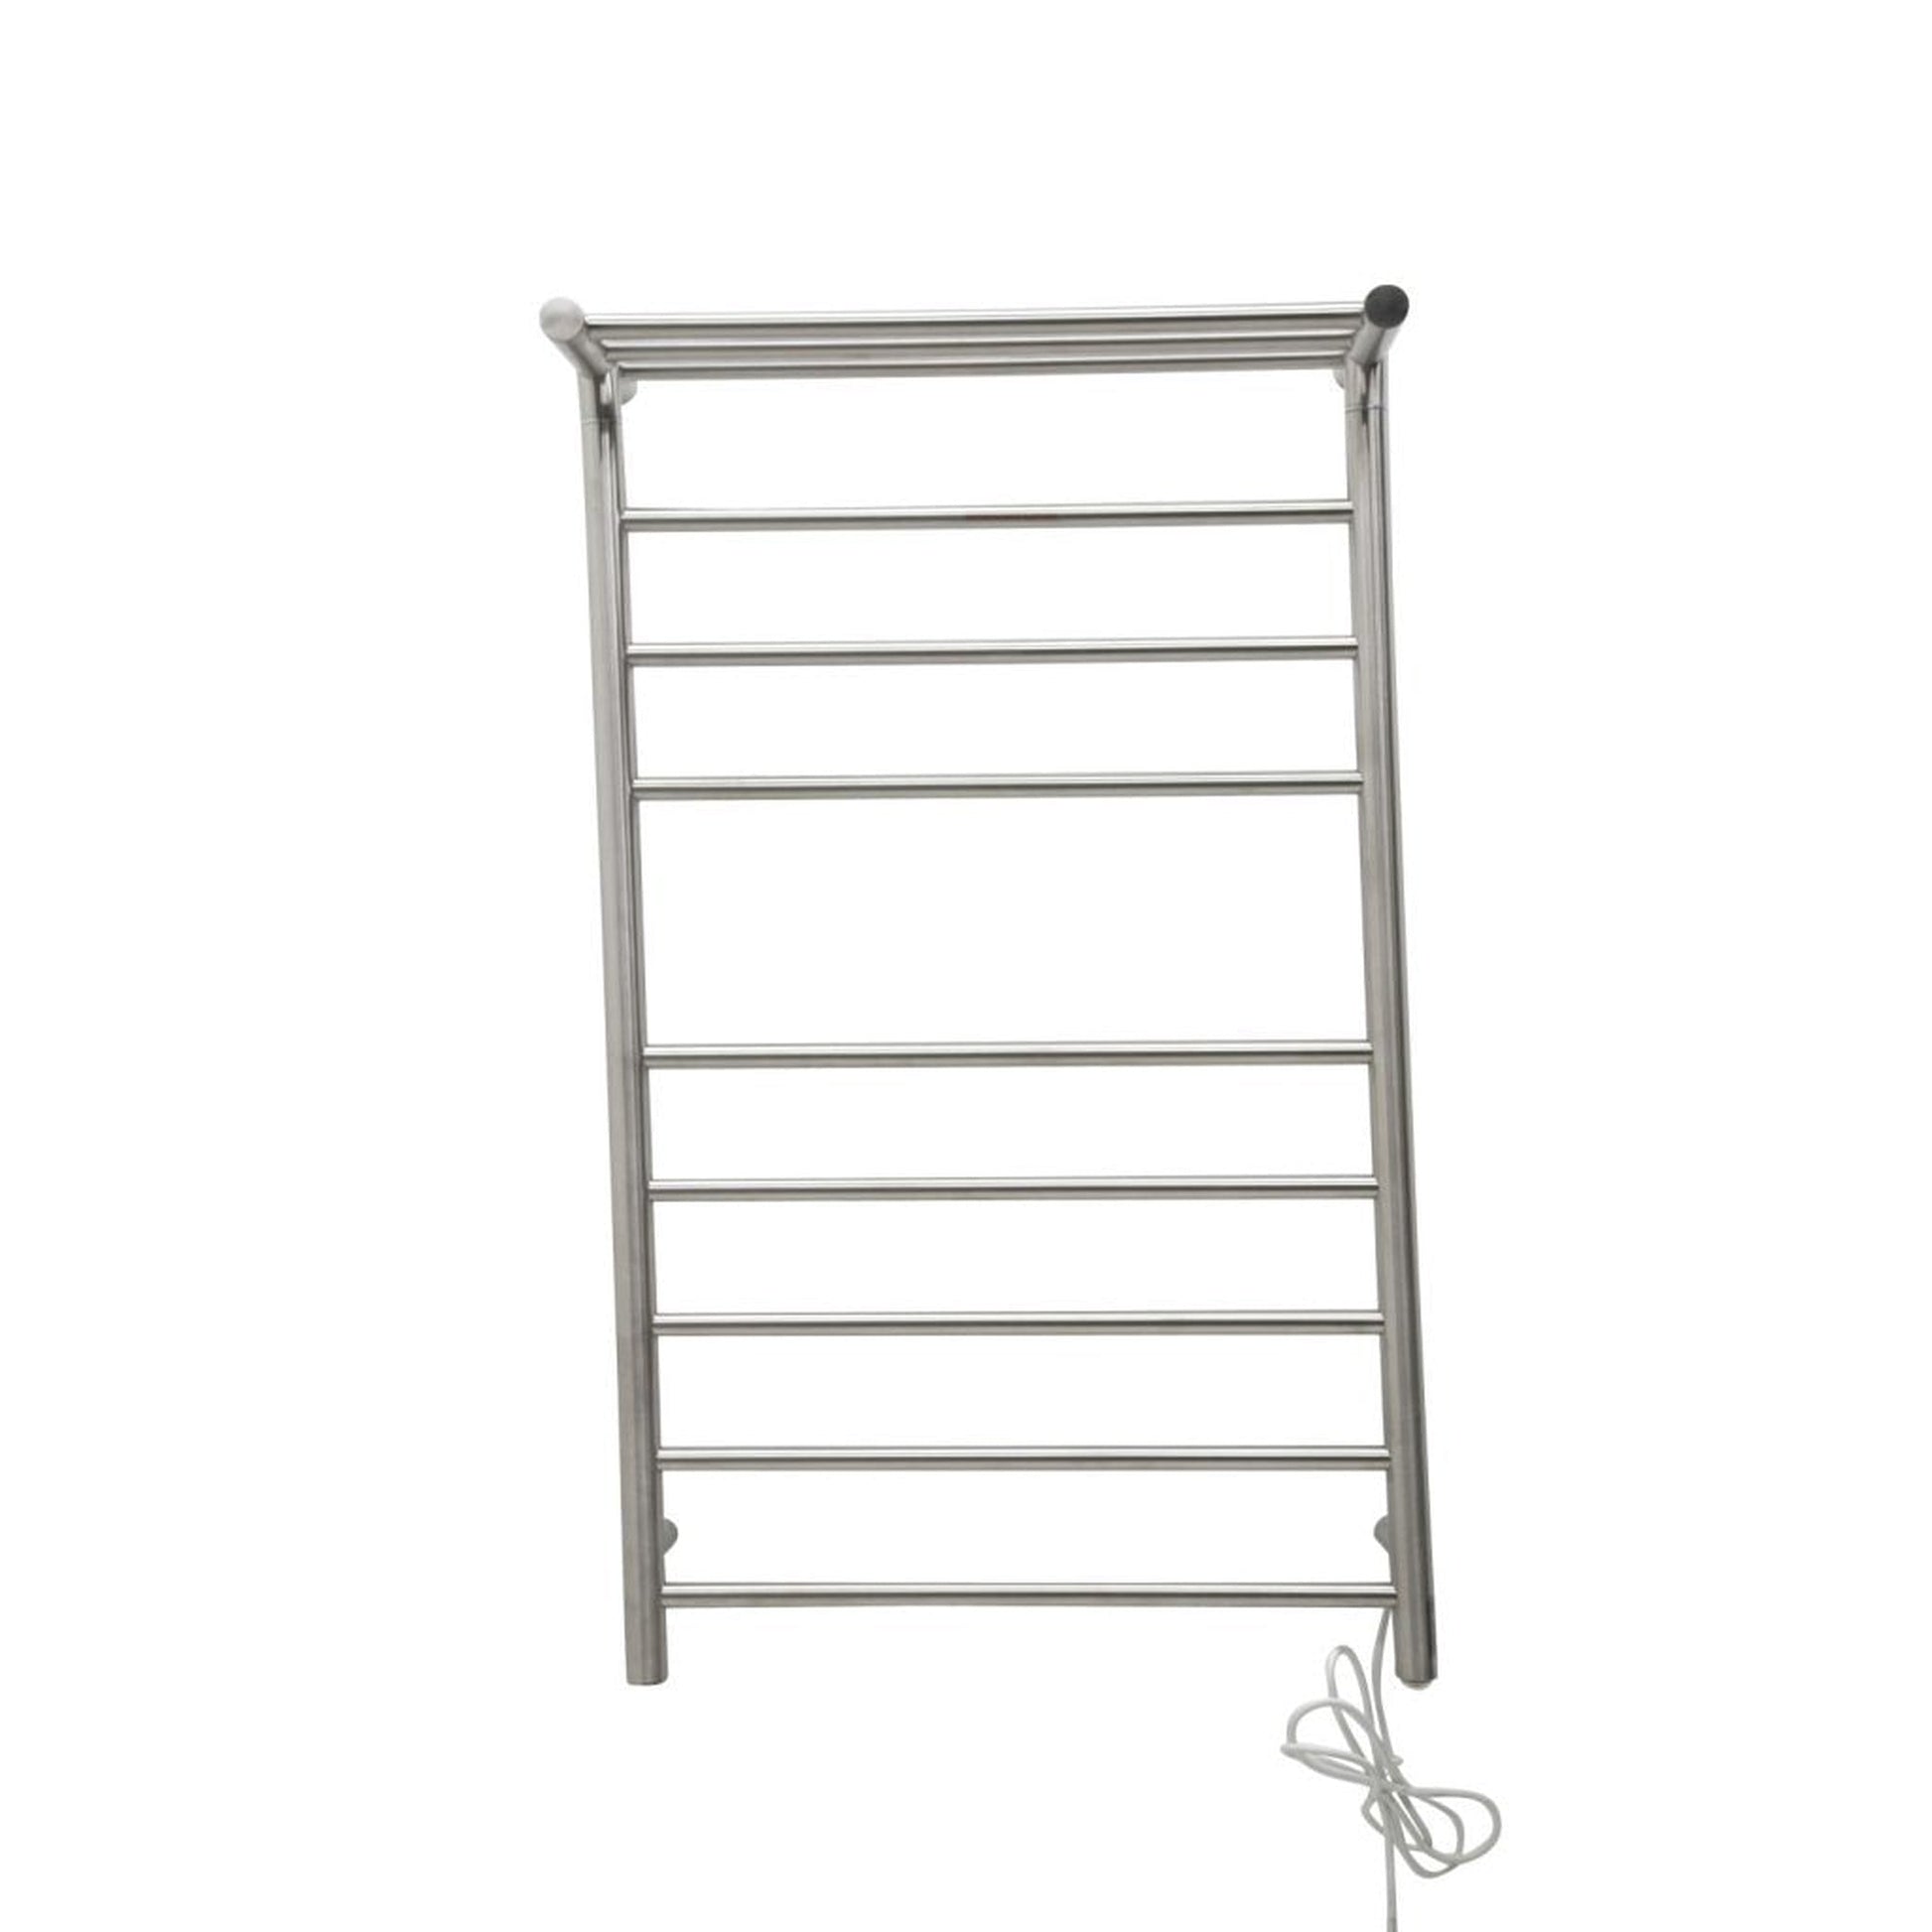 ANZZI Eve Series 8-Bar Stainless Steel Wall-Mounted Electric Towel Warmer Rack With Top Shelf in Brushed Nickel Finish